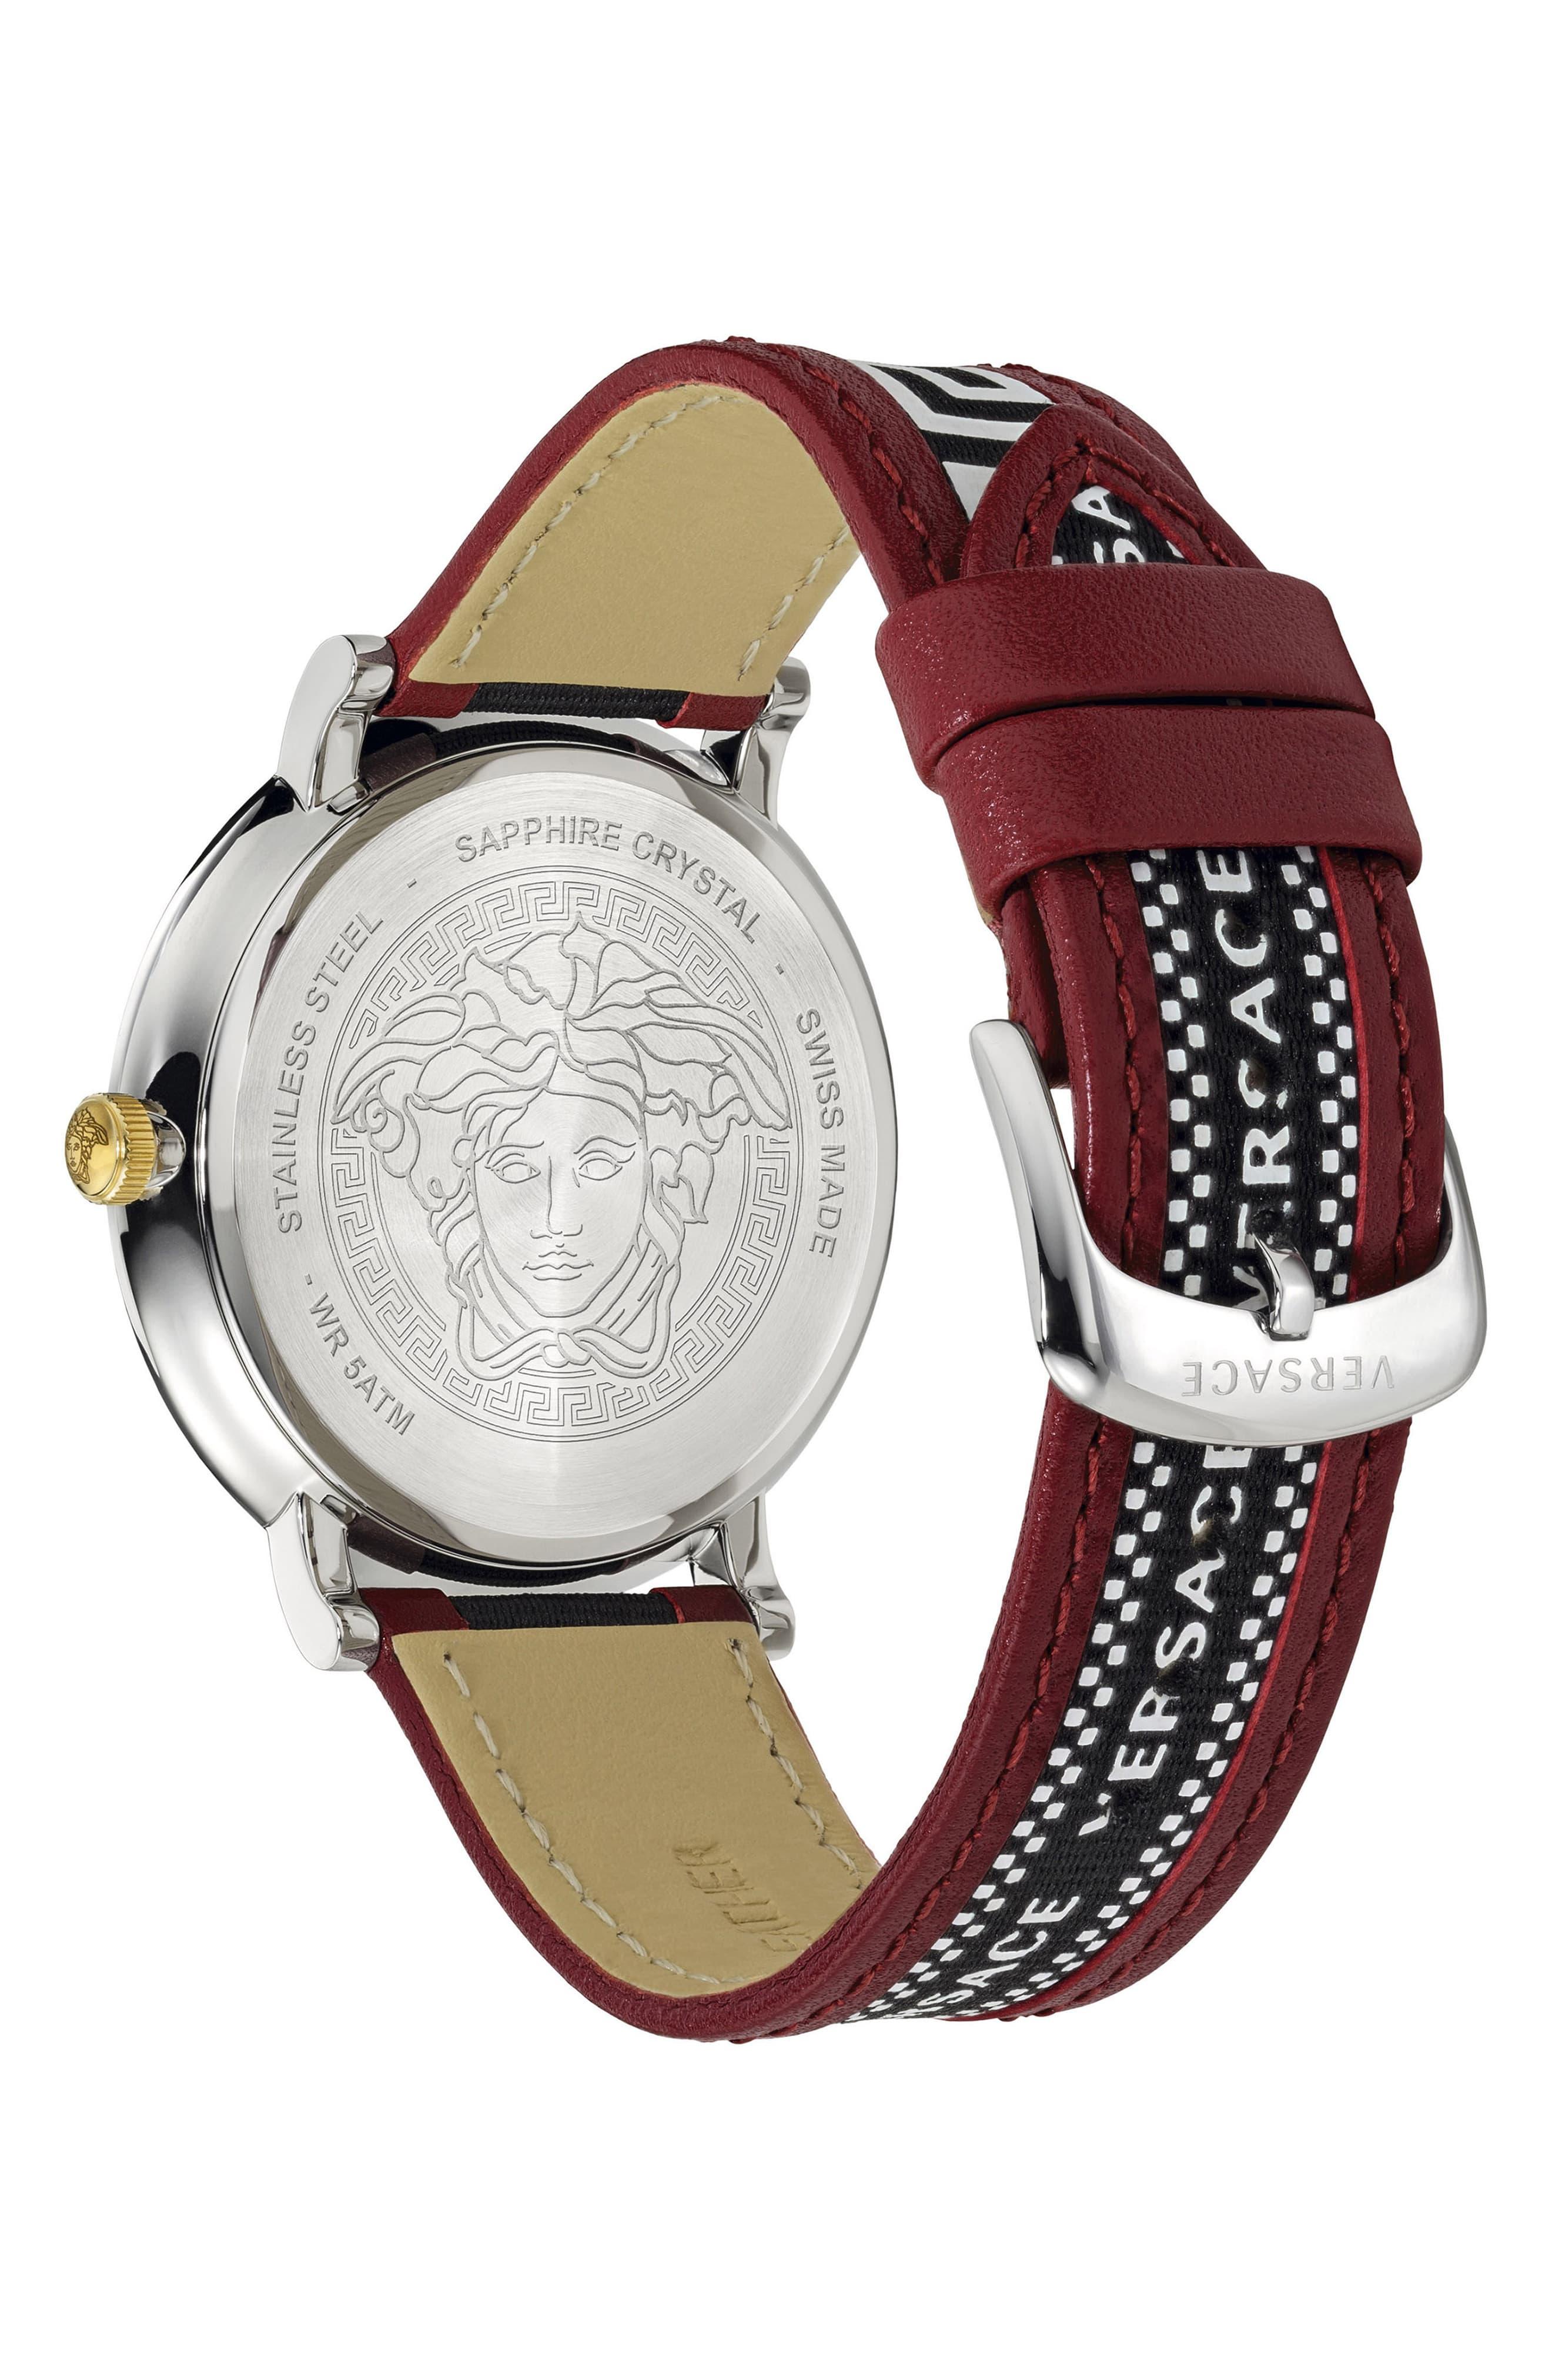 Versace V Circle Greca Leather Strap Watch in Red/ Silver (Metallic) - Lyst